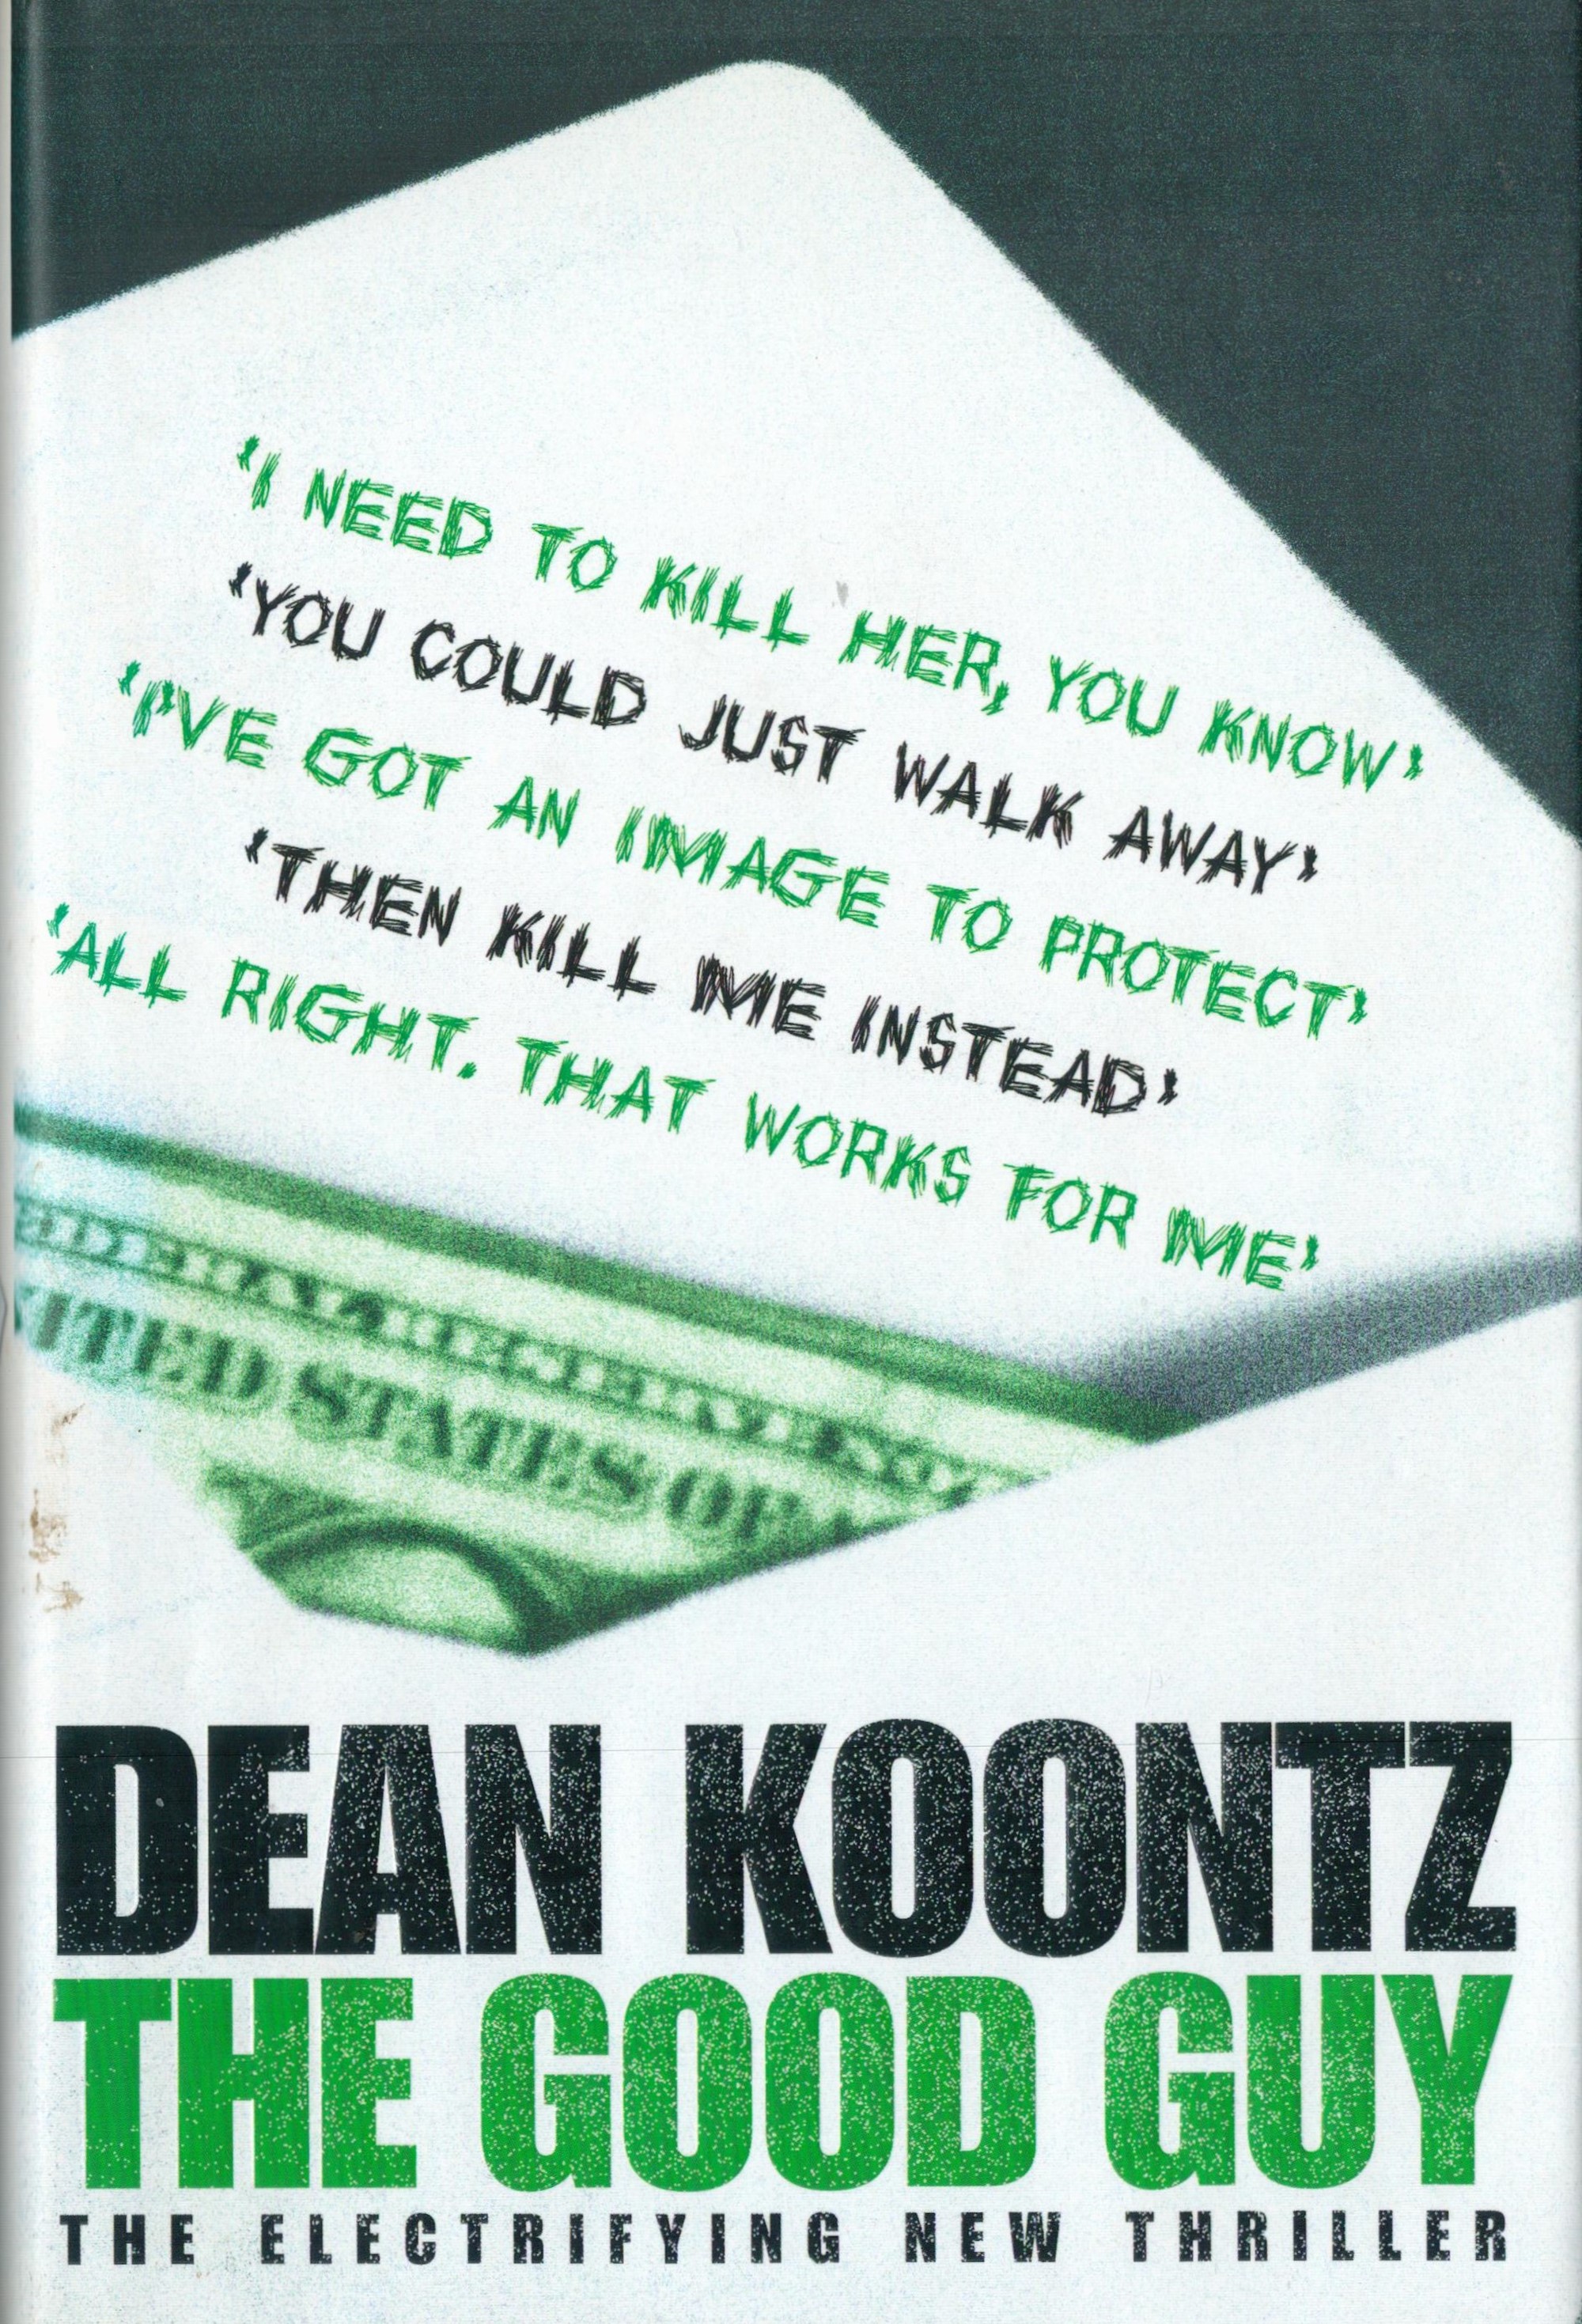 The Good Guy by Dean R Koontz Hardback Book 2007 First Edition published by Harper Collins some - Image 2 of 6